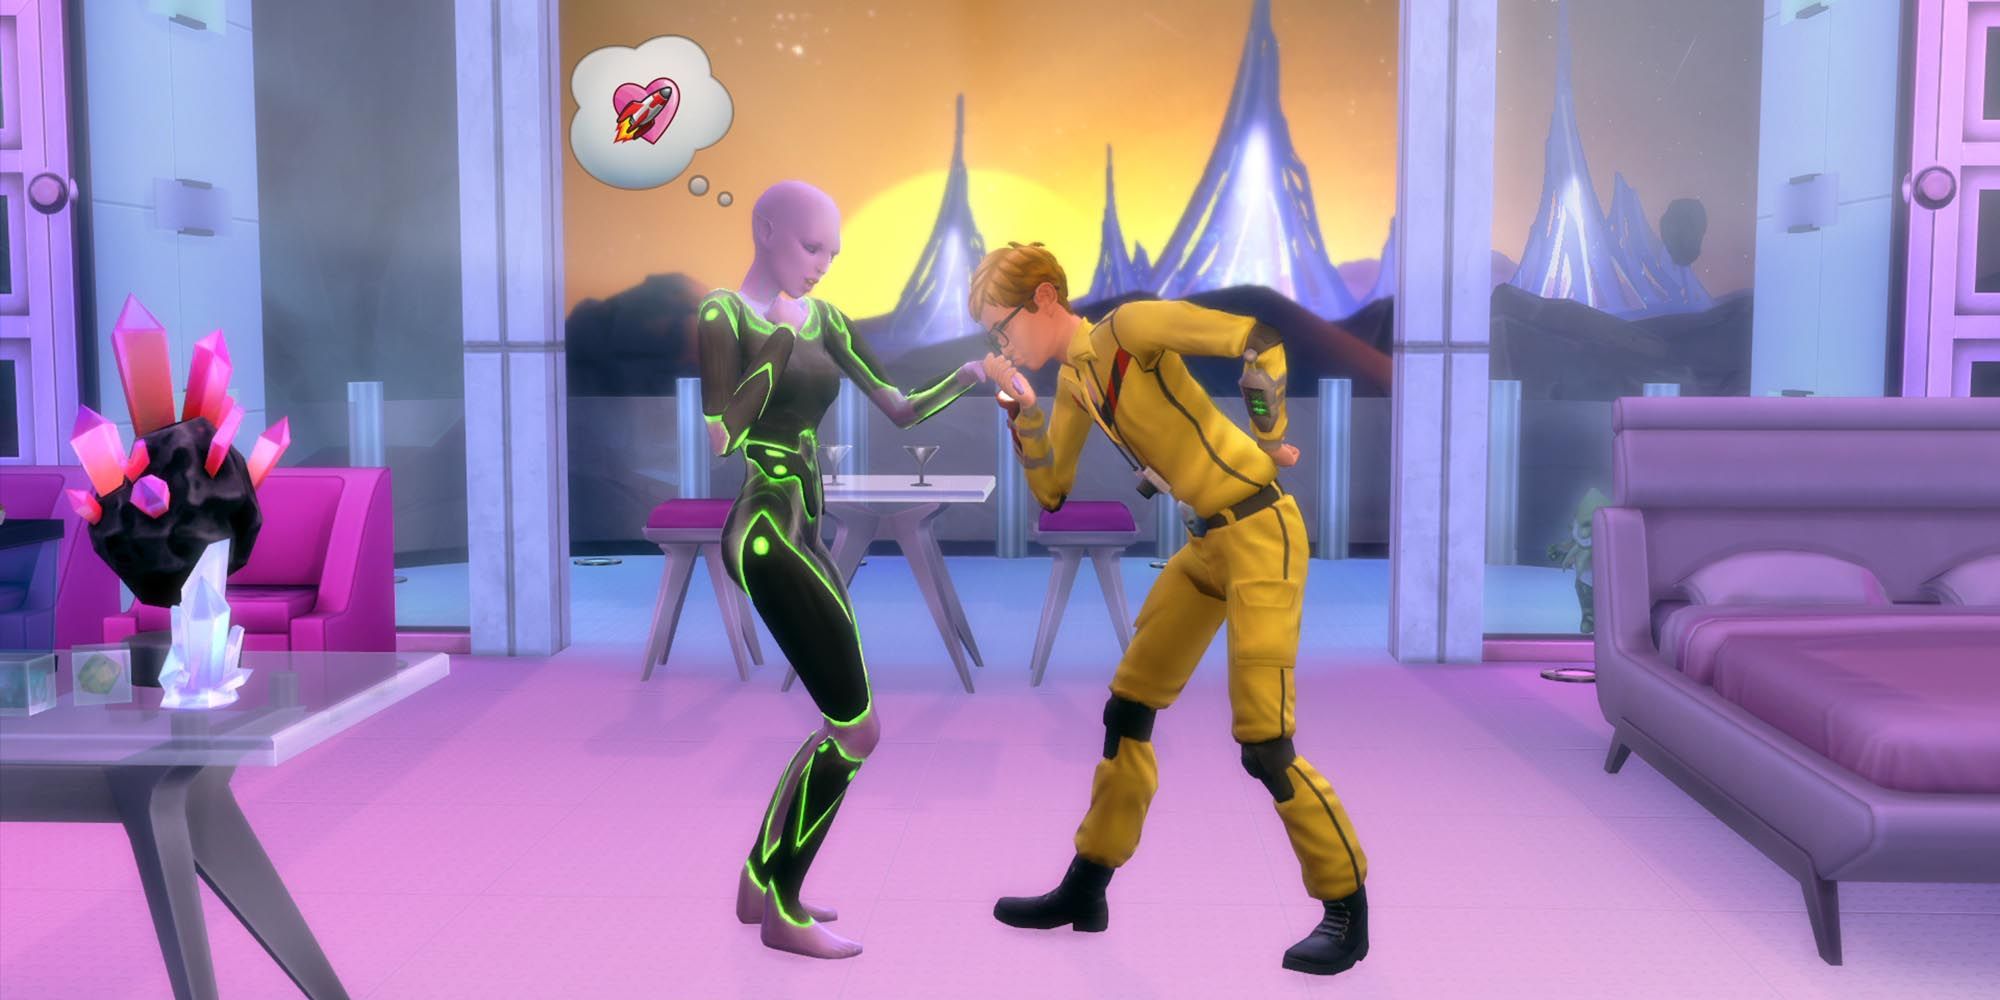 how to get aliens in sims 4